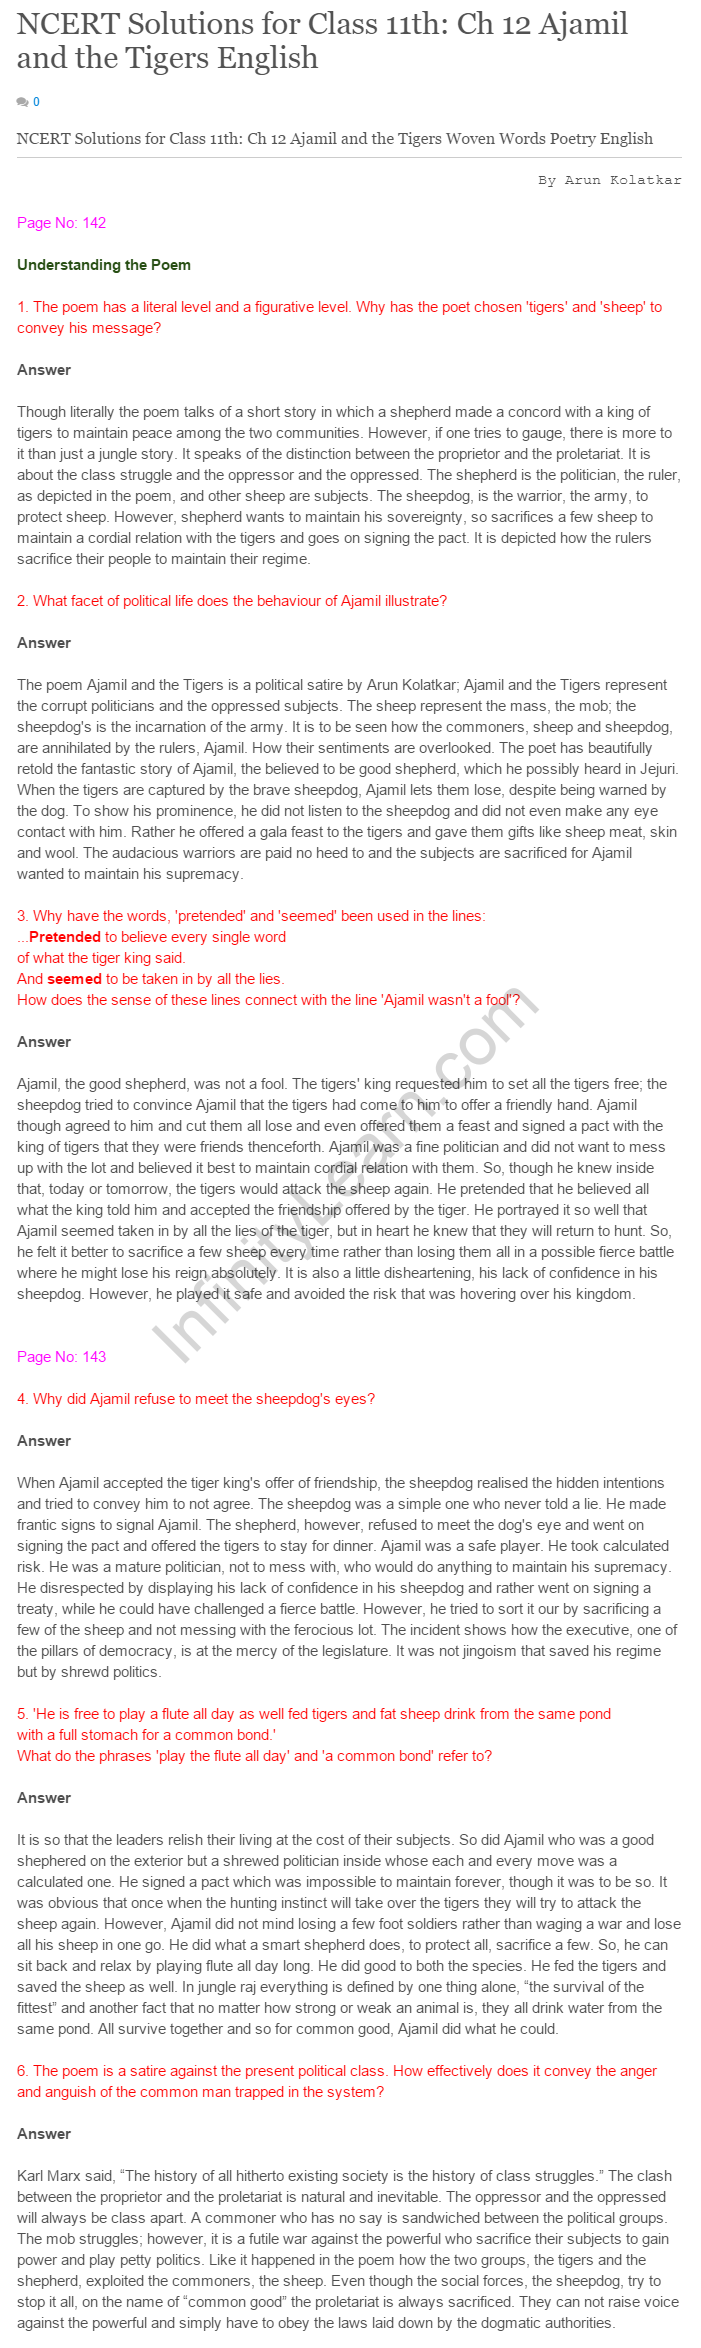 NCERT Solutions For Class 11 English Woven Words Ajamil and the Tigers